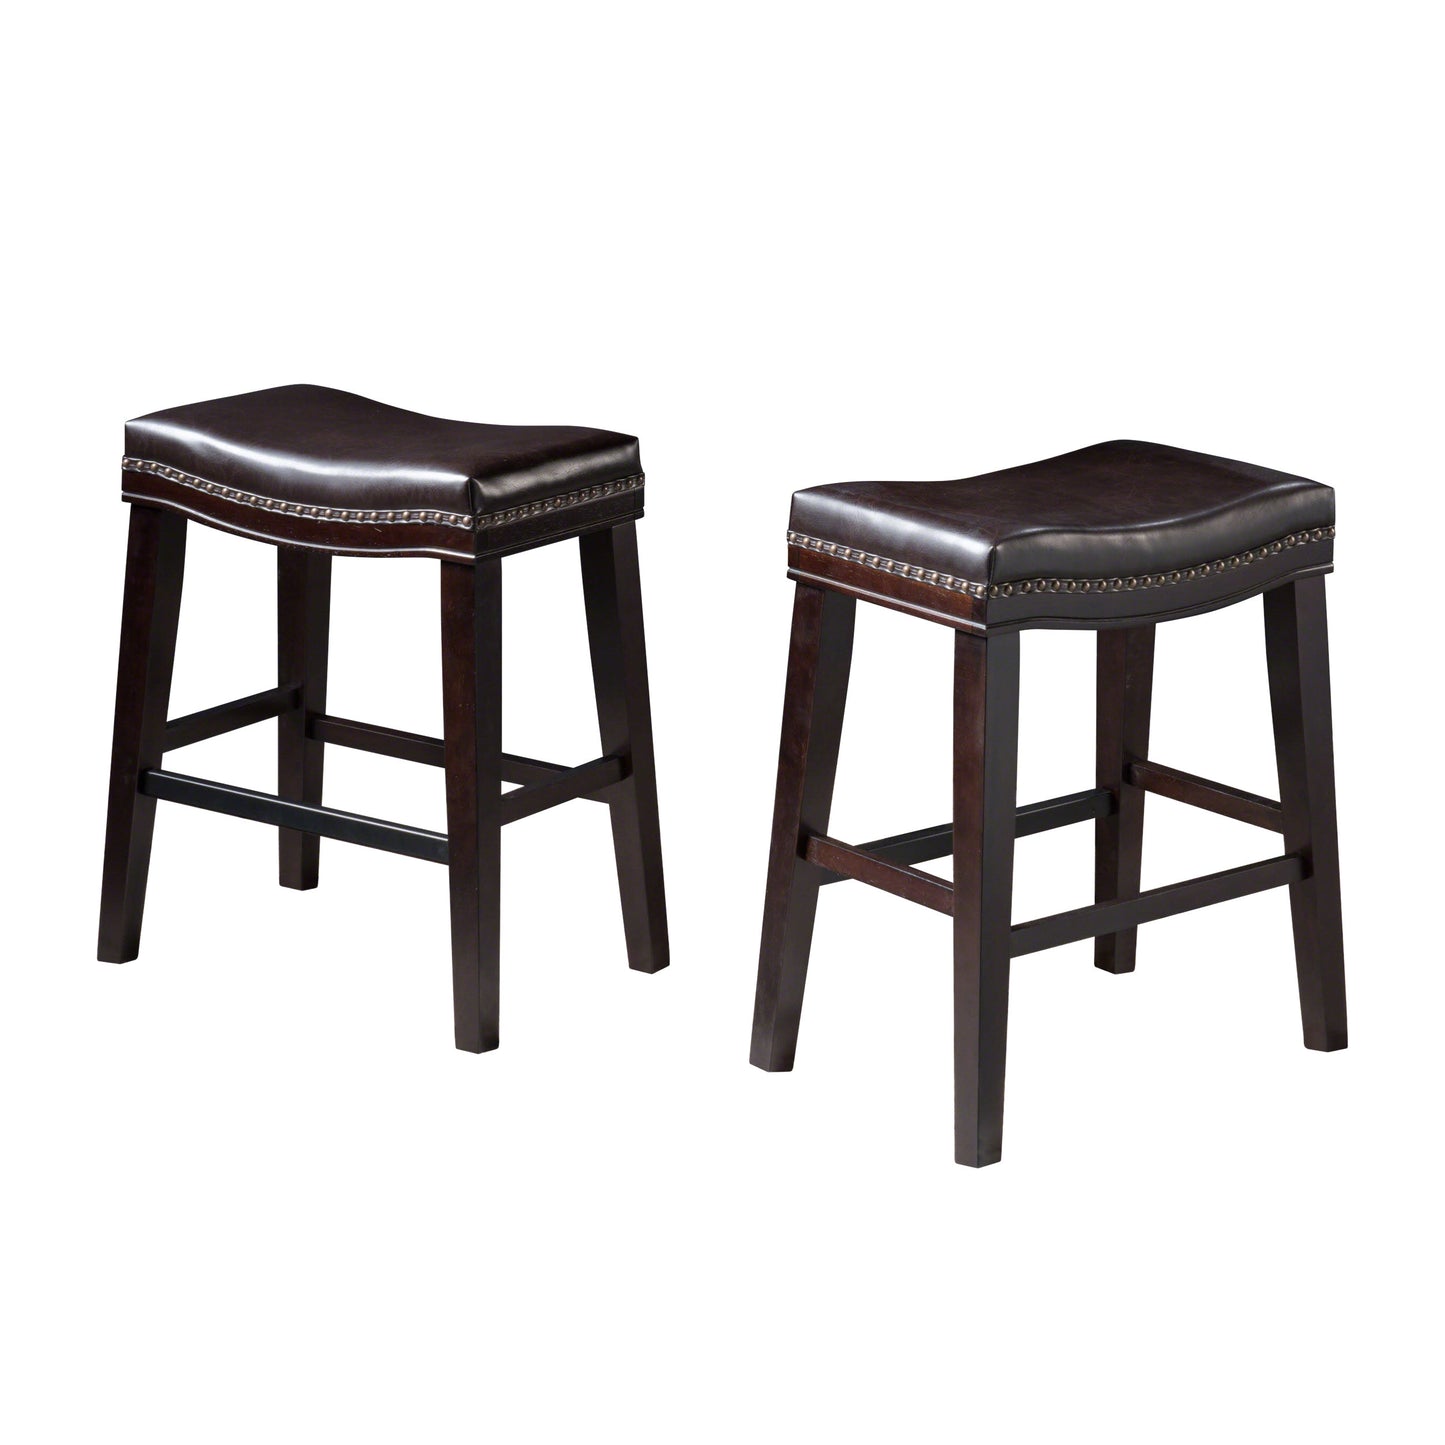 Haji Contemporary Upholstered Saddle Counter Stool with Nailhead Trim, Set of 2